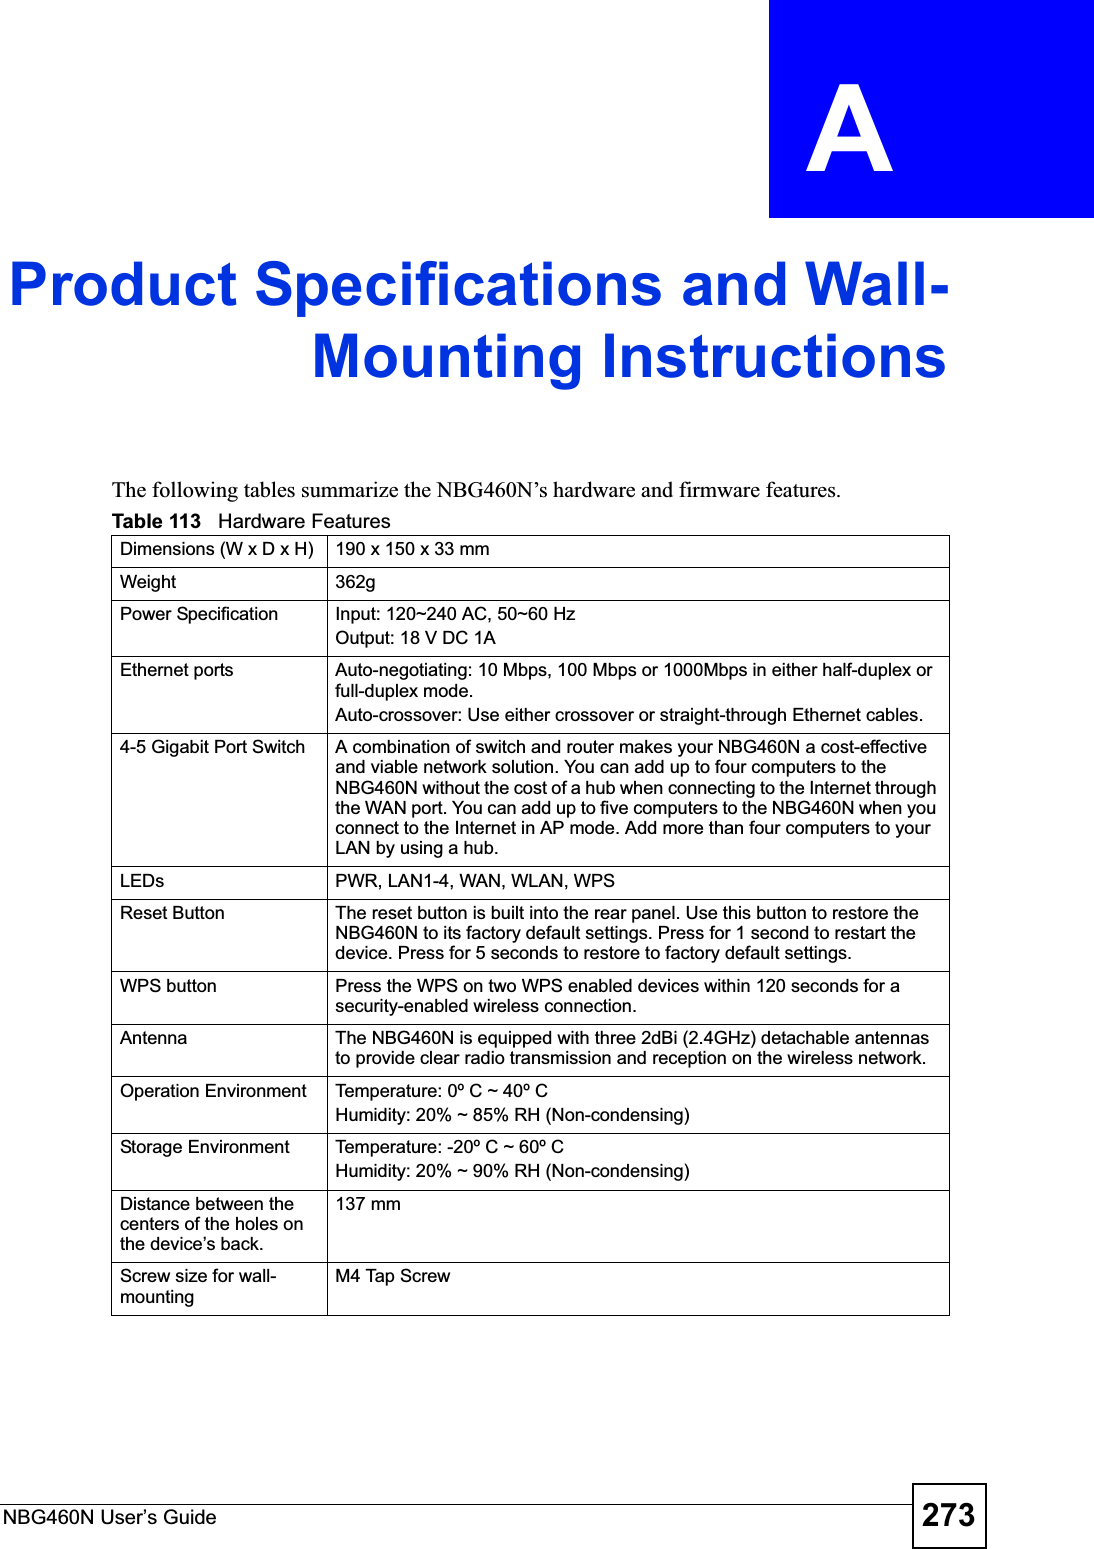 NBG460N User’s Guide 273APPENDIX  A Product Specifications and Wall-Mounting InstructionsThe following tables summarize the NBG460N’s hardware and firmware features.Table 113   Hardware FeaturesDimensions (W x D x H)  190 x 150 x 33 mmWeight 362gPower Specification Input: 120~240 AC, 50~60 HzOutput: 18 V DC 1AEthernet ports Auto-negotiating: 10 Mbps, 100 Mbps or 1000Mbps in either half-duplex or full-duplex mode.Auto-crossover: Use either crossover or straight-through Ethernet cables.4-5 Gigabit Port Switch A combination of switch and router makes your NBG460N a cost-effective and viable network solution. You can add up to four computers to the NBG460N without the cost of a hub when connecting to the Internet through the WAN port. You can add up to five computers to the NBG460N when you connect to the Internet in AP mode. Add more than four computers to your LAN by using a hub.LEDs PWR, LAN1-4, WAN, WLAN, WPSReset Button The reset button is built into the rear panel. Use this button to restore the NBG460N to its factory default settings. Press for 1 second to restart the device. Press for 5 seconds to restore to factory default settings.WPS button Press the WPS on two WPS enabled devices within 120 seconds for a security-enabled wireless connection.Antenna The NBG460N is equipped with three 2dBi (2.4GHz) detachable antennas to provide clear radio transmission and reception on the wireless network. Operation Environment Temperature: 0º C ~ 40º CHumidity: 20% ~ 85% RH (Non-condensing)Storage Environment Temperature: -20º C ~ 60º CHumidity: 20% ~ 90% RH (Non-condensing)Distance between the centers of the holes on the device’s back.137 mmScrew size for wall-mountingM4 Tap Screw